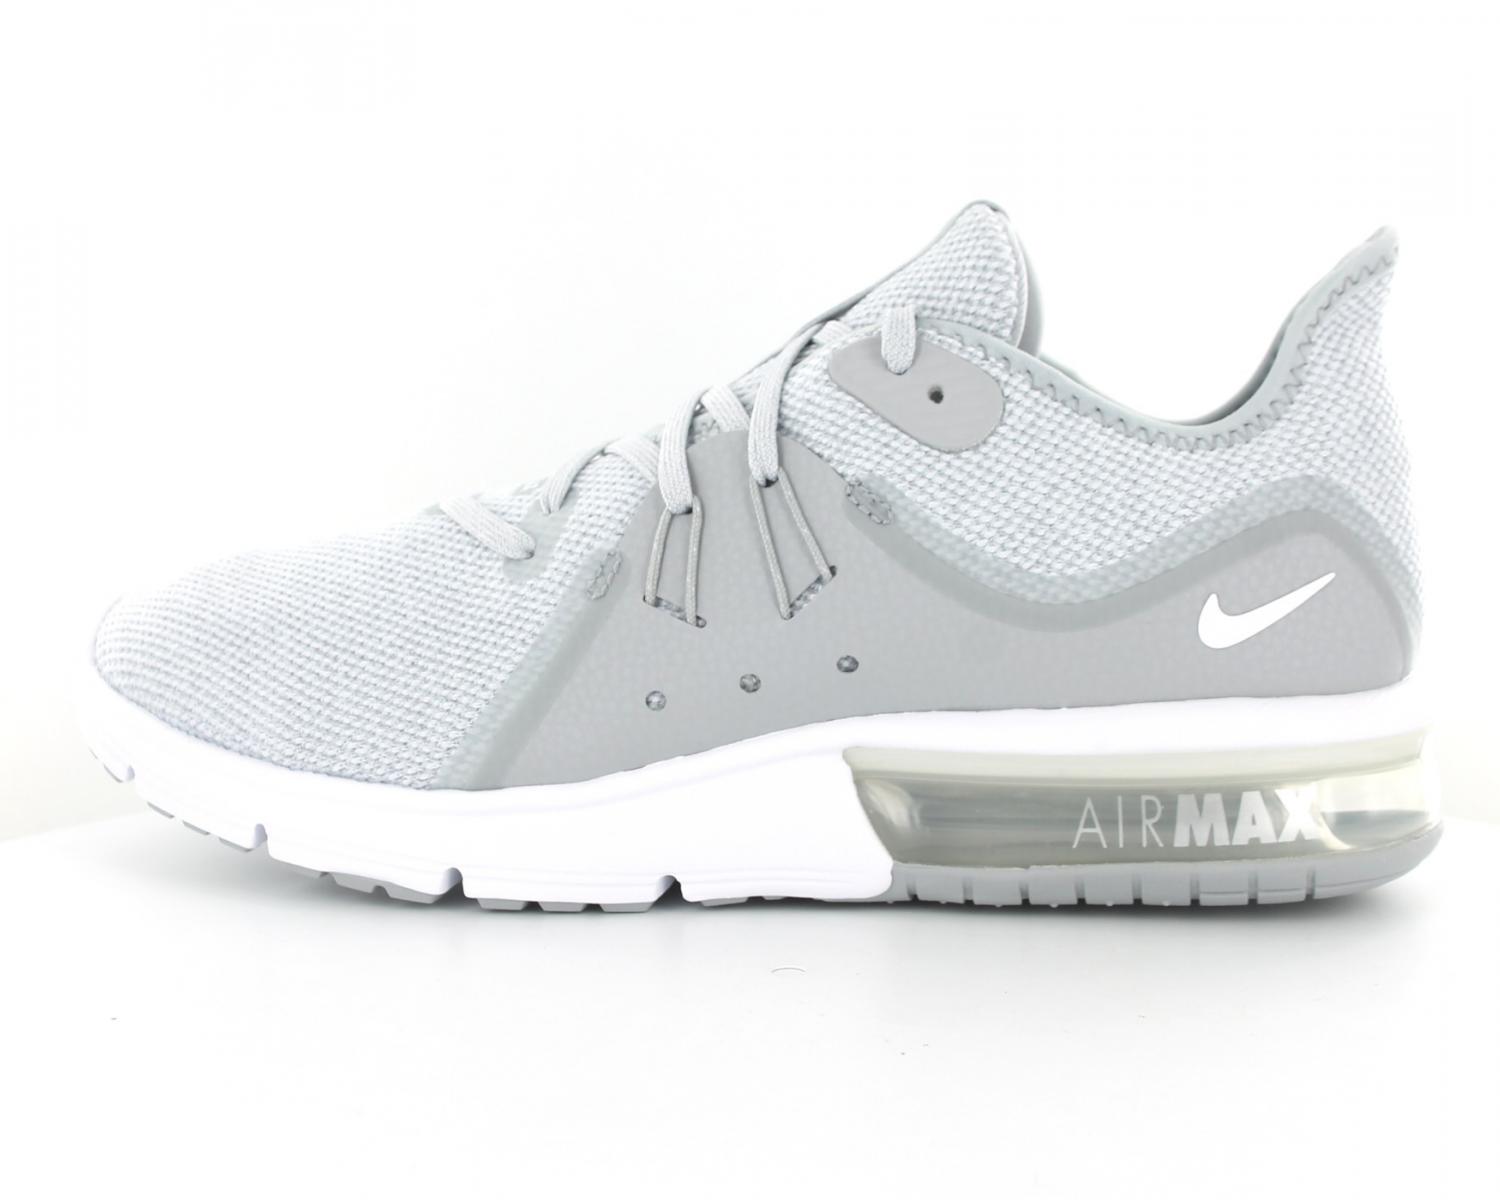 nike air max sequent 3 homme